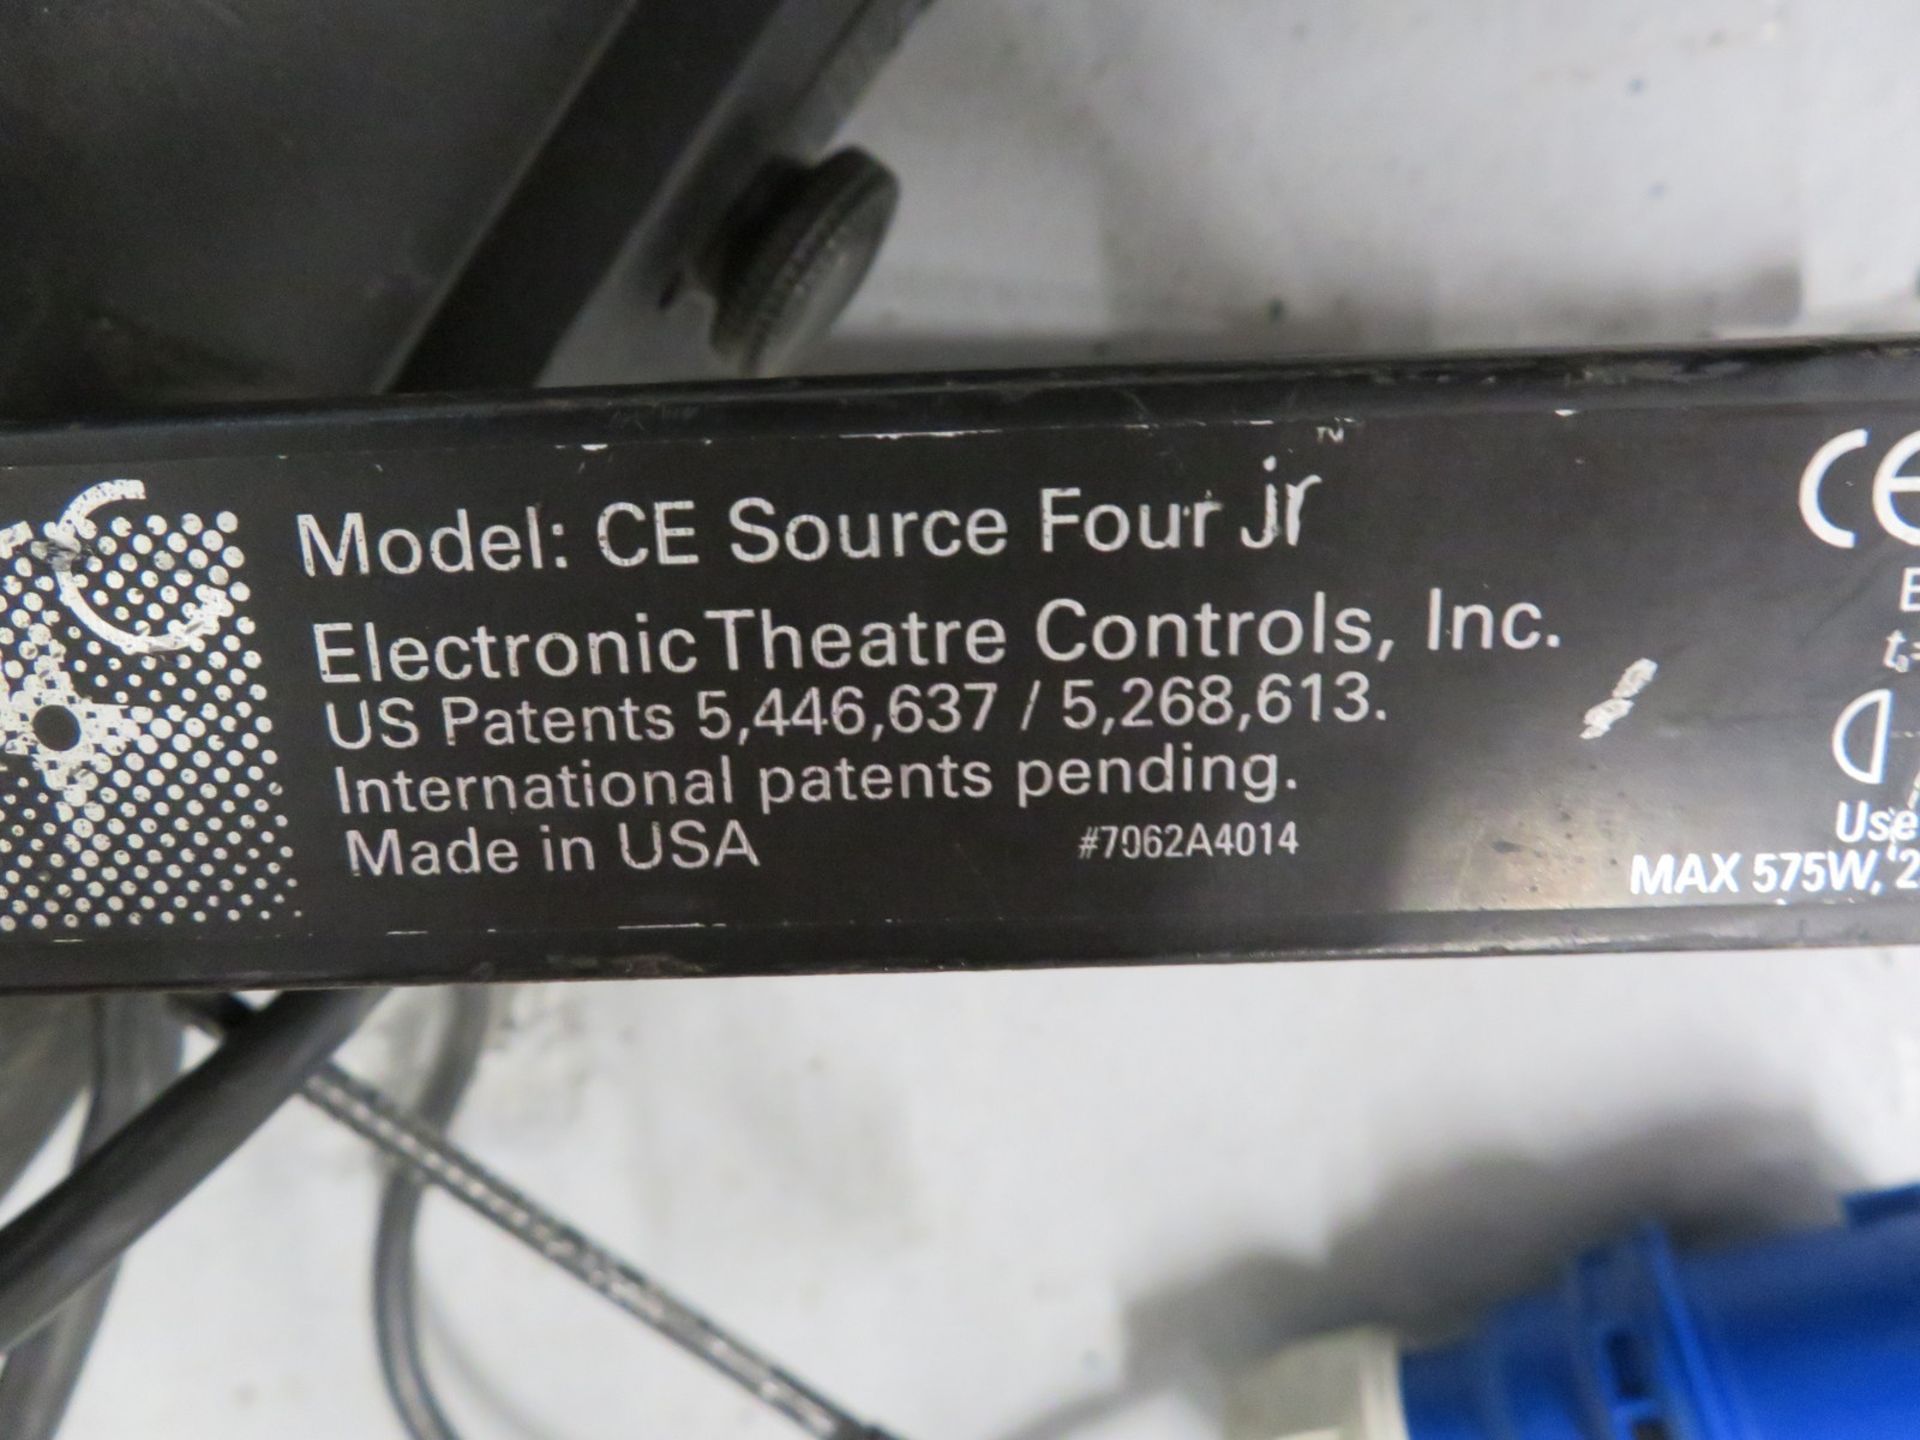 5x ETC Source 4 junior profile. Includes hanging clamps and safety bonds. Working conditio - Image 5 of 5